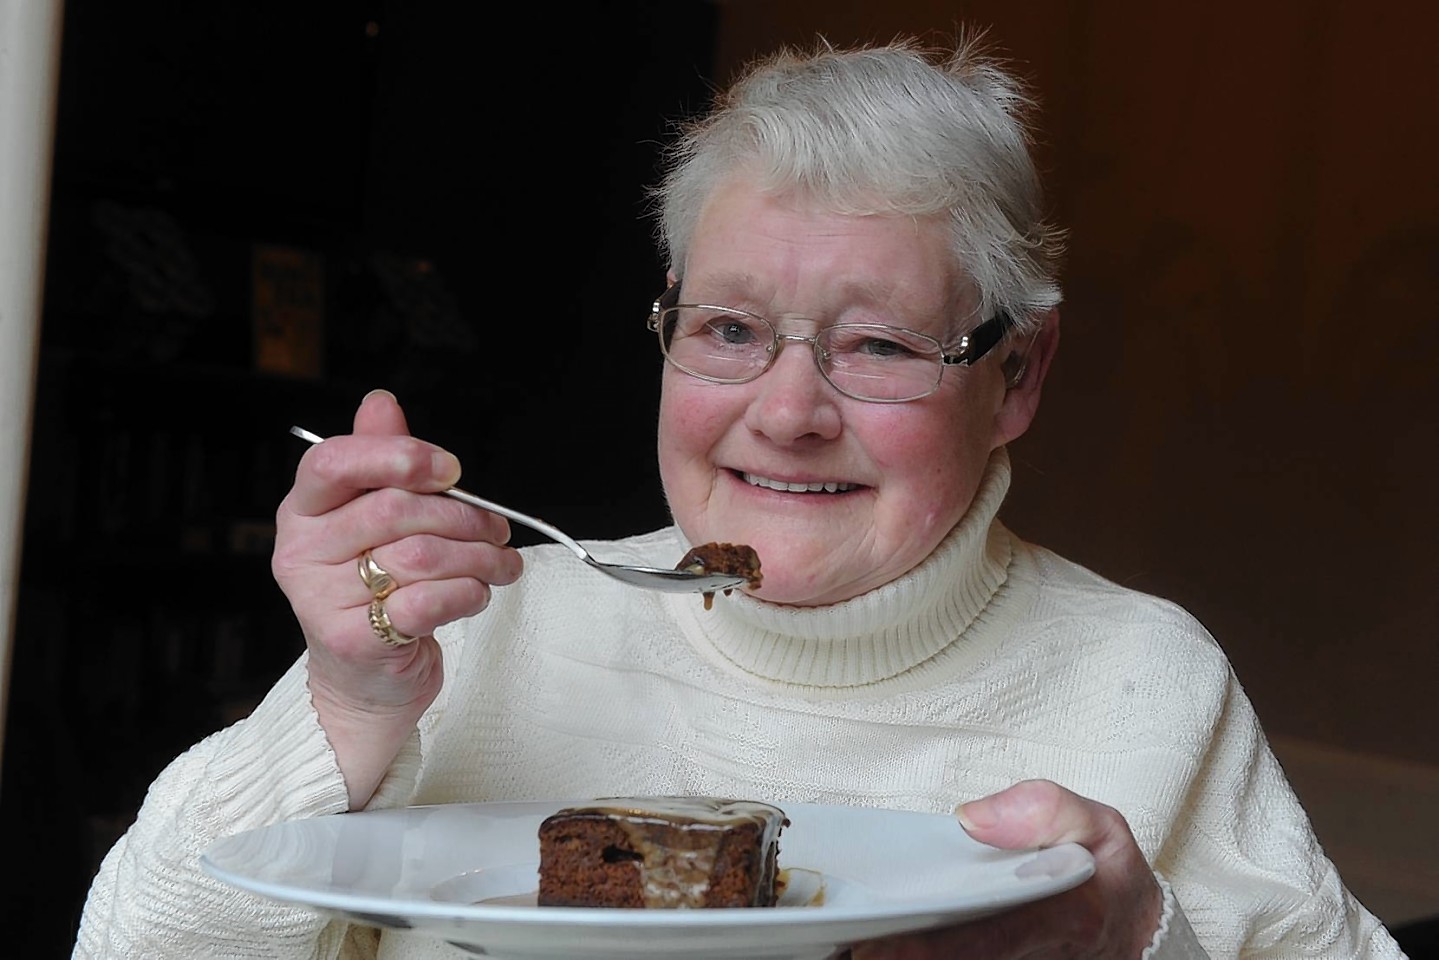 Nancy Stott claims to have invented the desert while working at the Udny Arms